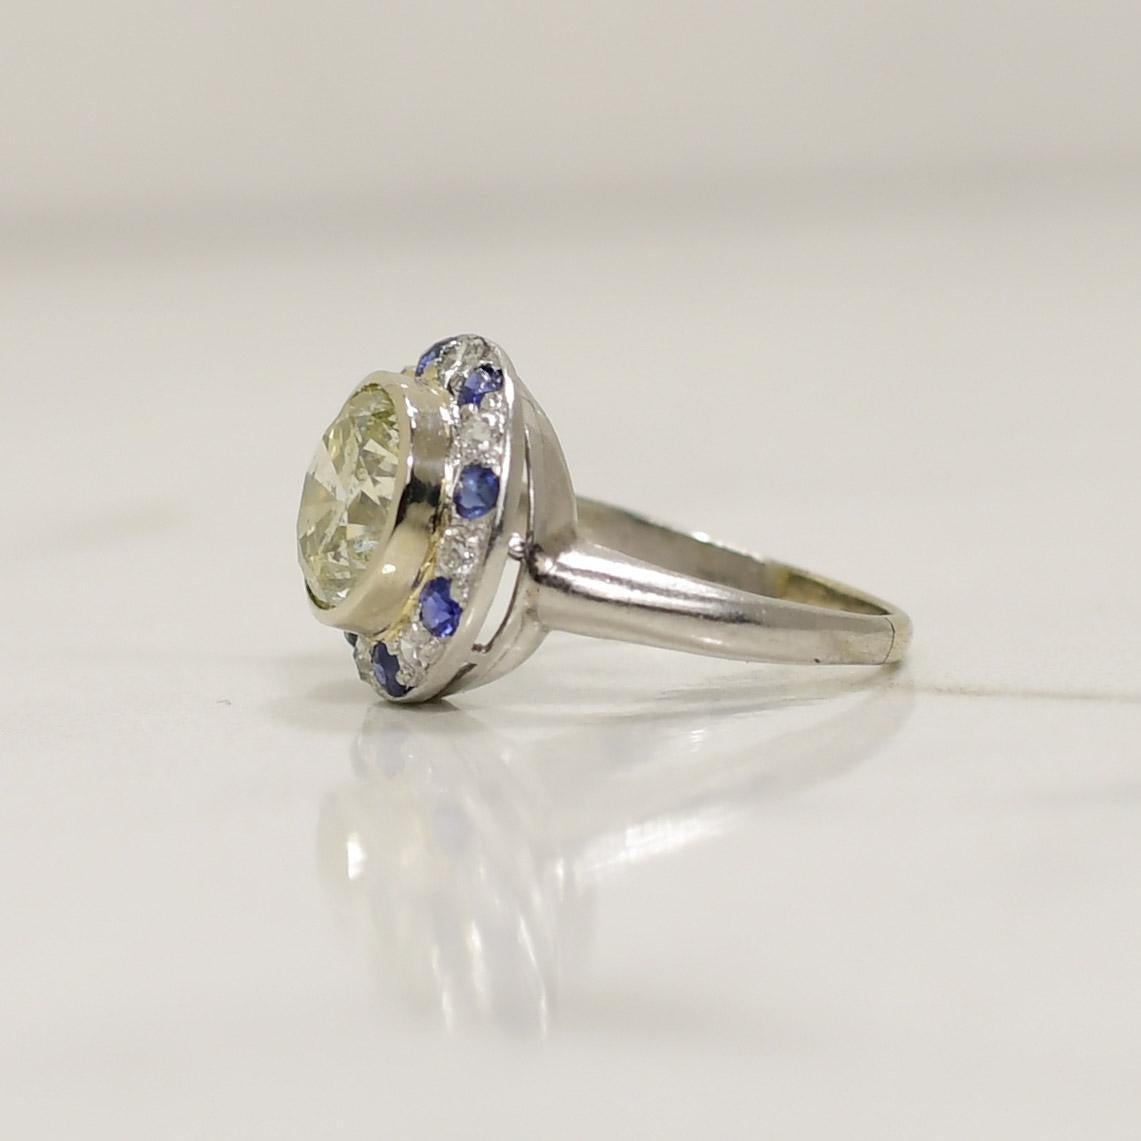 Palladium 2.44 CTW Diamond and Sapphire Vintage Ring In Good Condition For Sale In Addison, TX